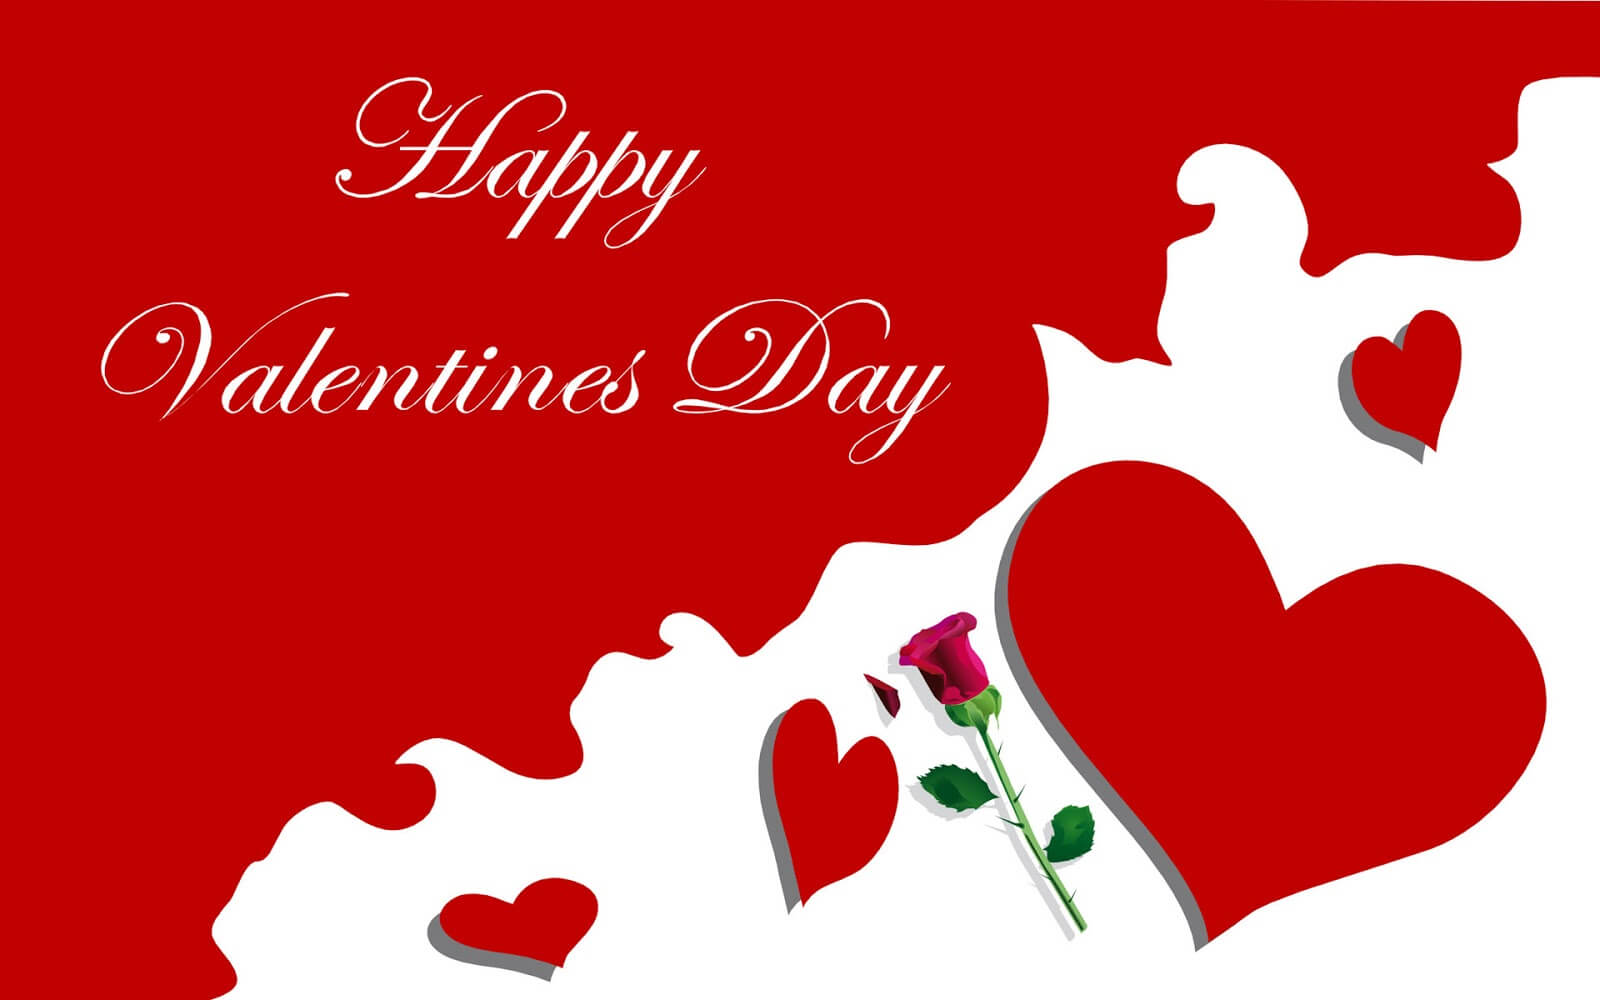 Happy Valentines day Lover Heart Image Wallpapers